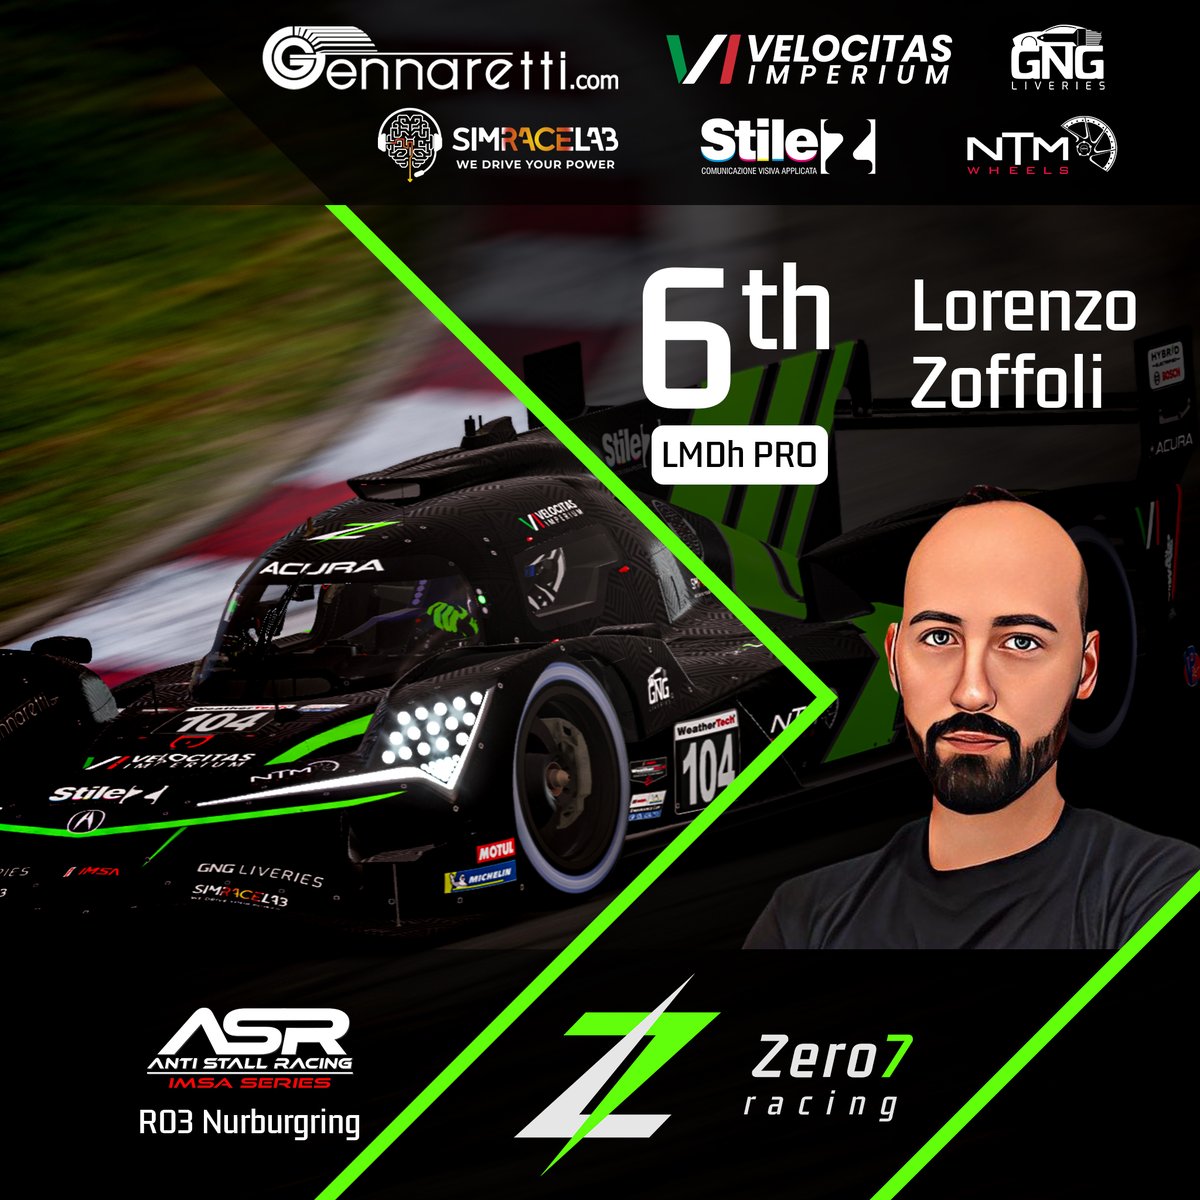 A challenging race for Lorenzo Zoffoli at the Nurburgring with his Acura in the Anti Stall Racing. He finishes in sixth place, but manages to maintain the 2nd position in the overall standings. Next race on January 25th at Road Atlanta. #Zero7Racing #antistallracing #iRacing